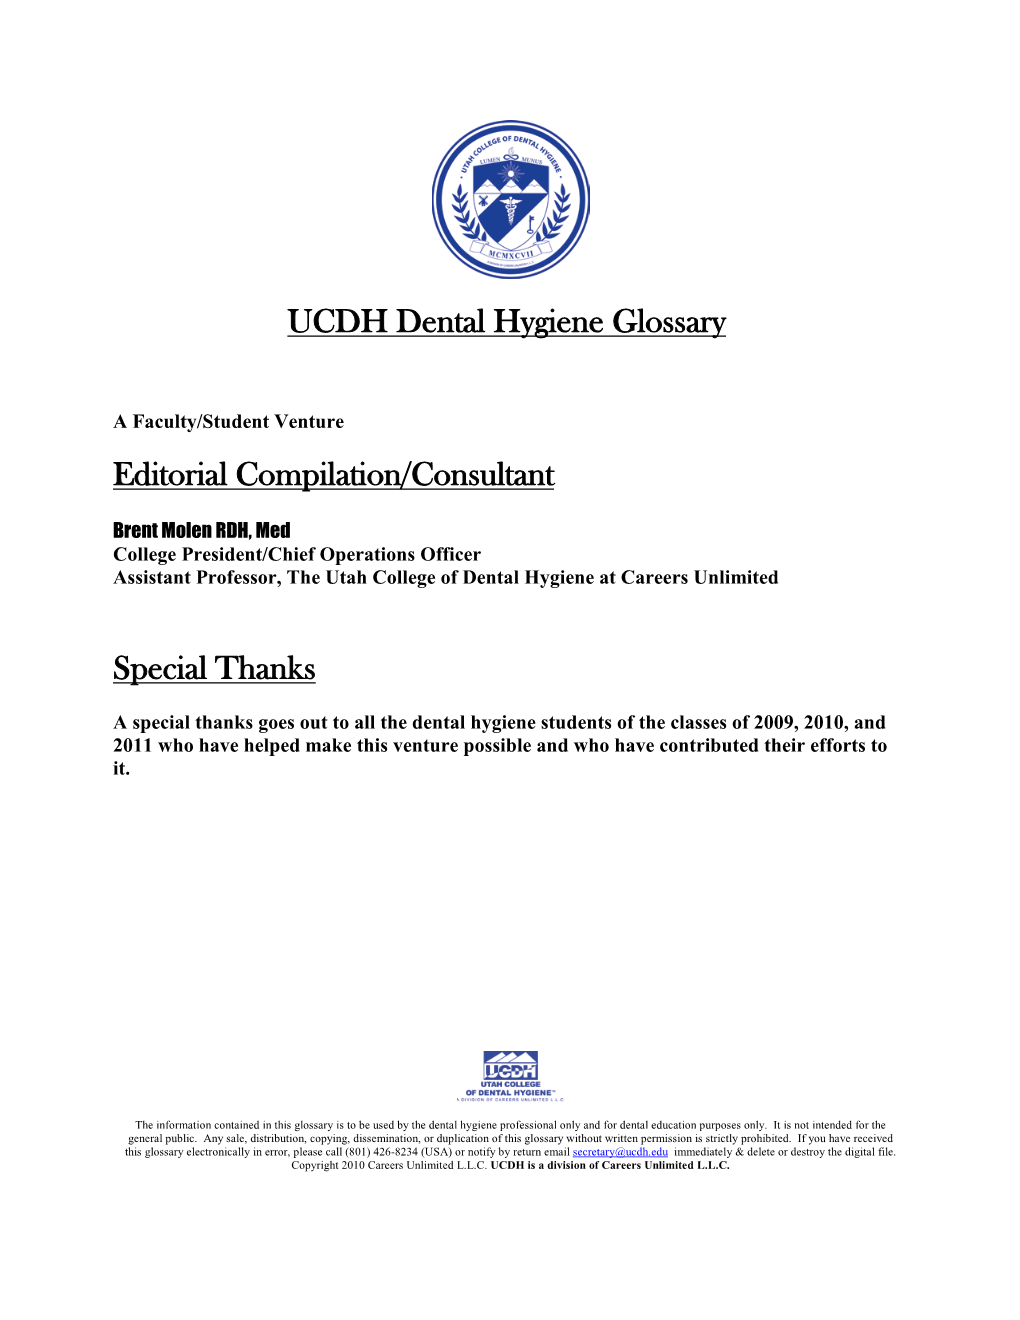 UCDH Dental Hygiene Glossary Editorial Compilation/Consultant Special Thanks